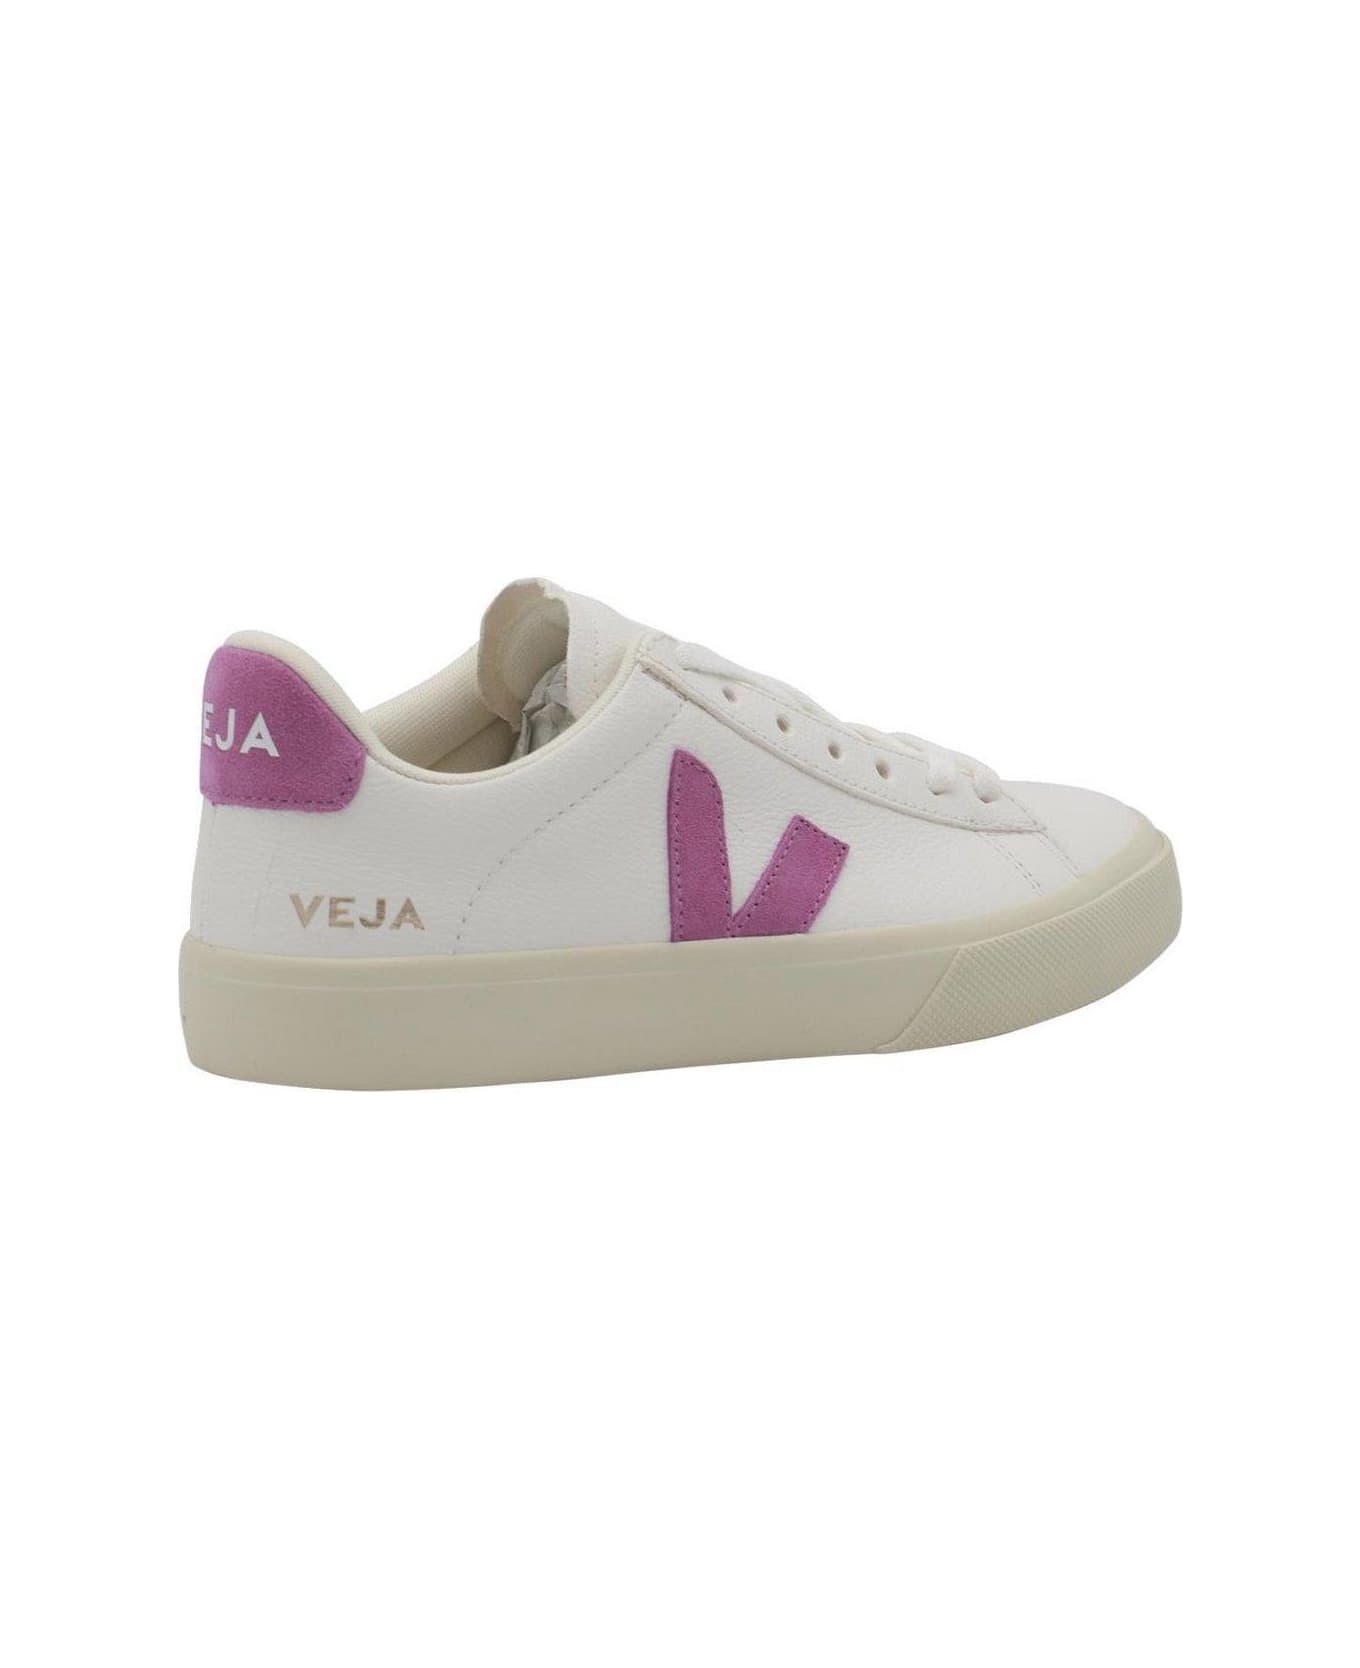 Veja Campo Logo Patch Sneakers - White/Mulberry スニーカー